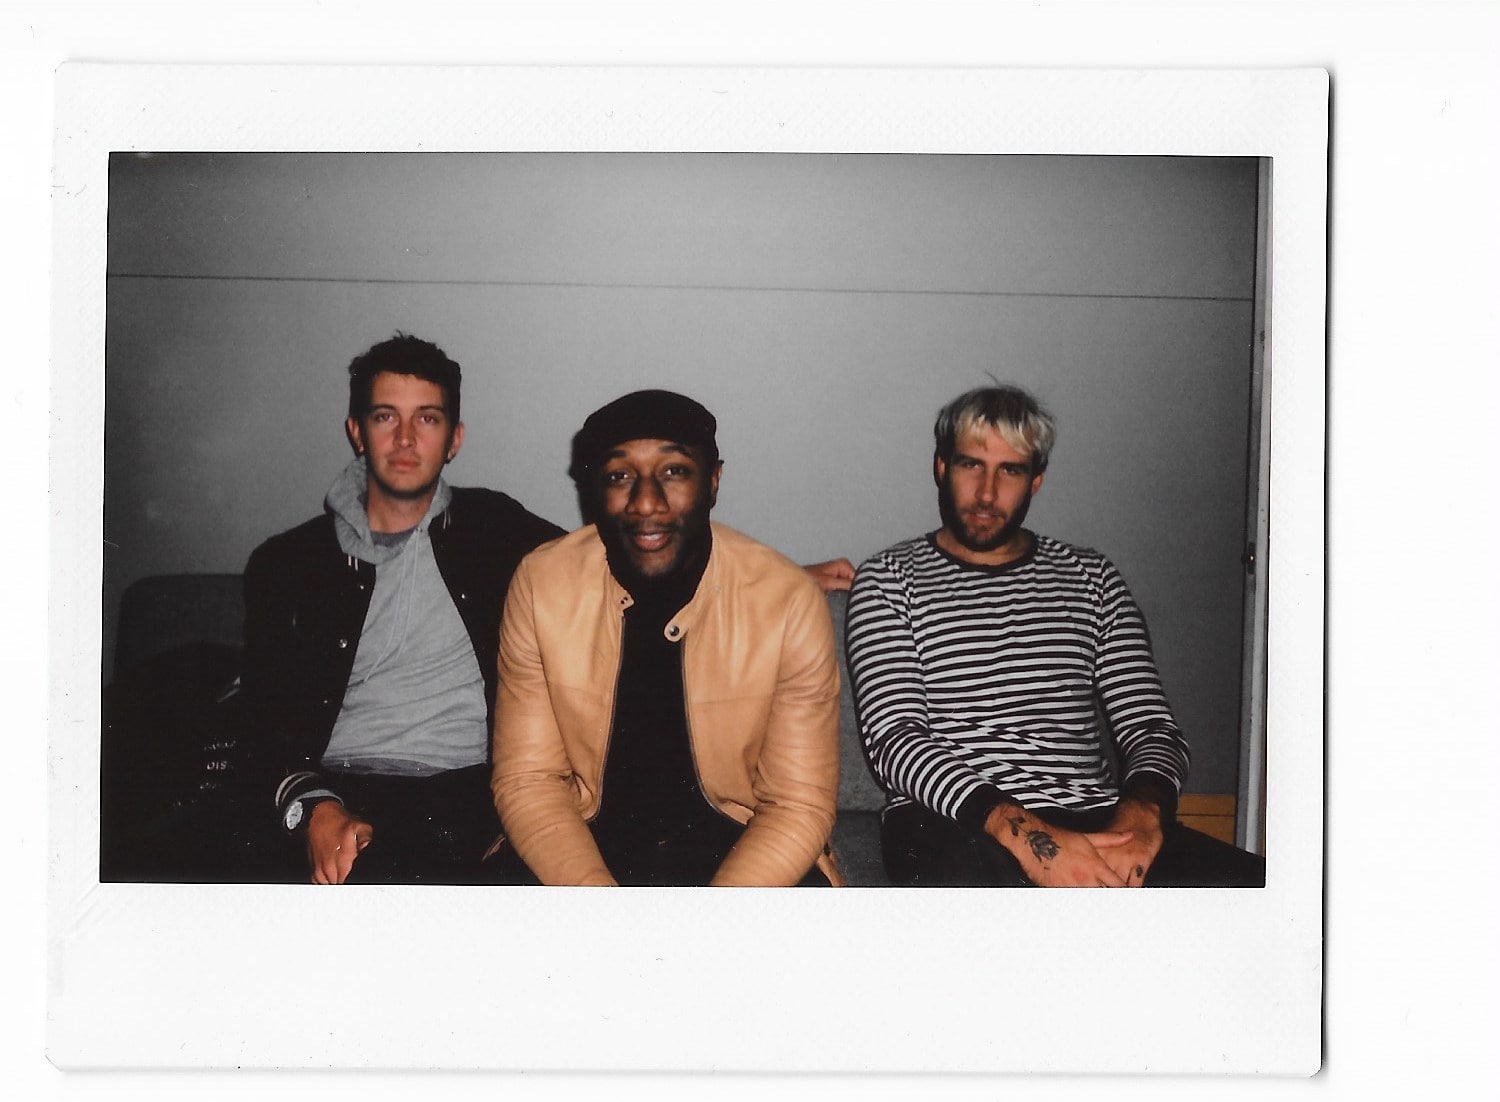 Pickymagazine, Picky Magazine, Blog, Blogger, Online, Indie, Musik, Indie Musik, Magazin, Newcomer, TLDR, Aloe Blacc, Better Than Ever, Flight Facilities